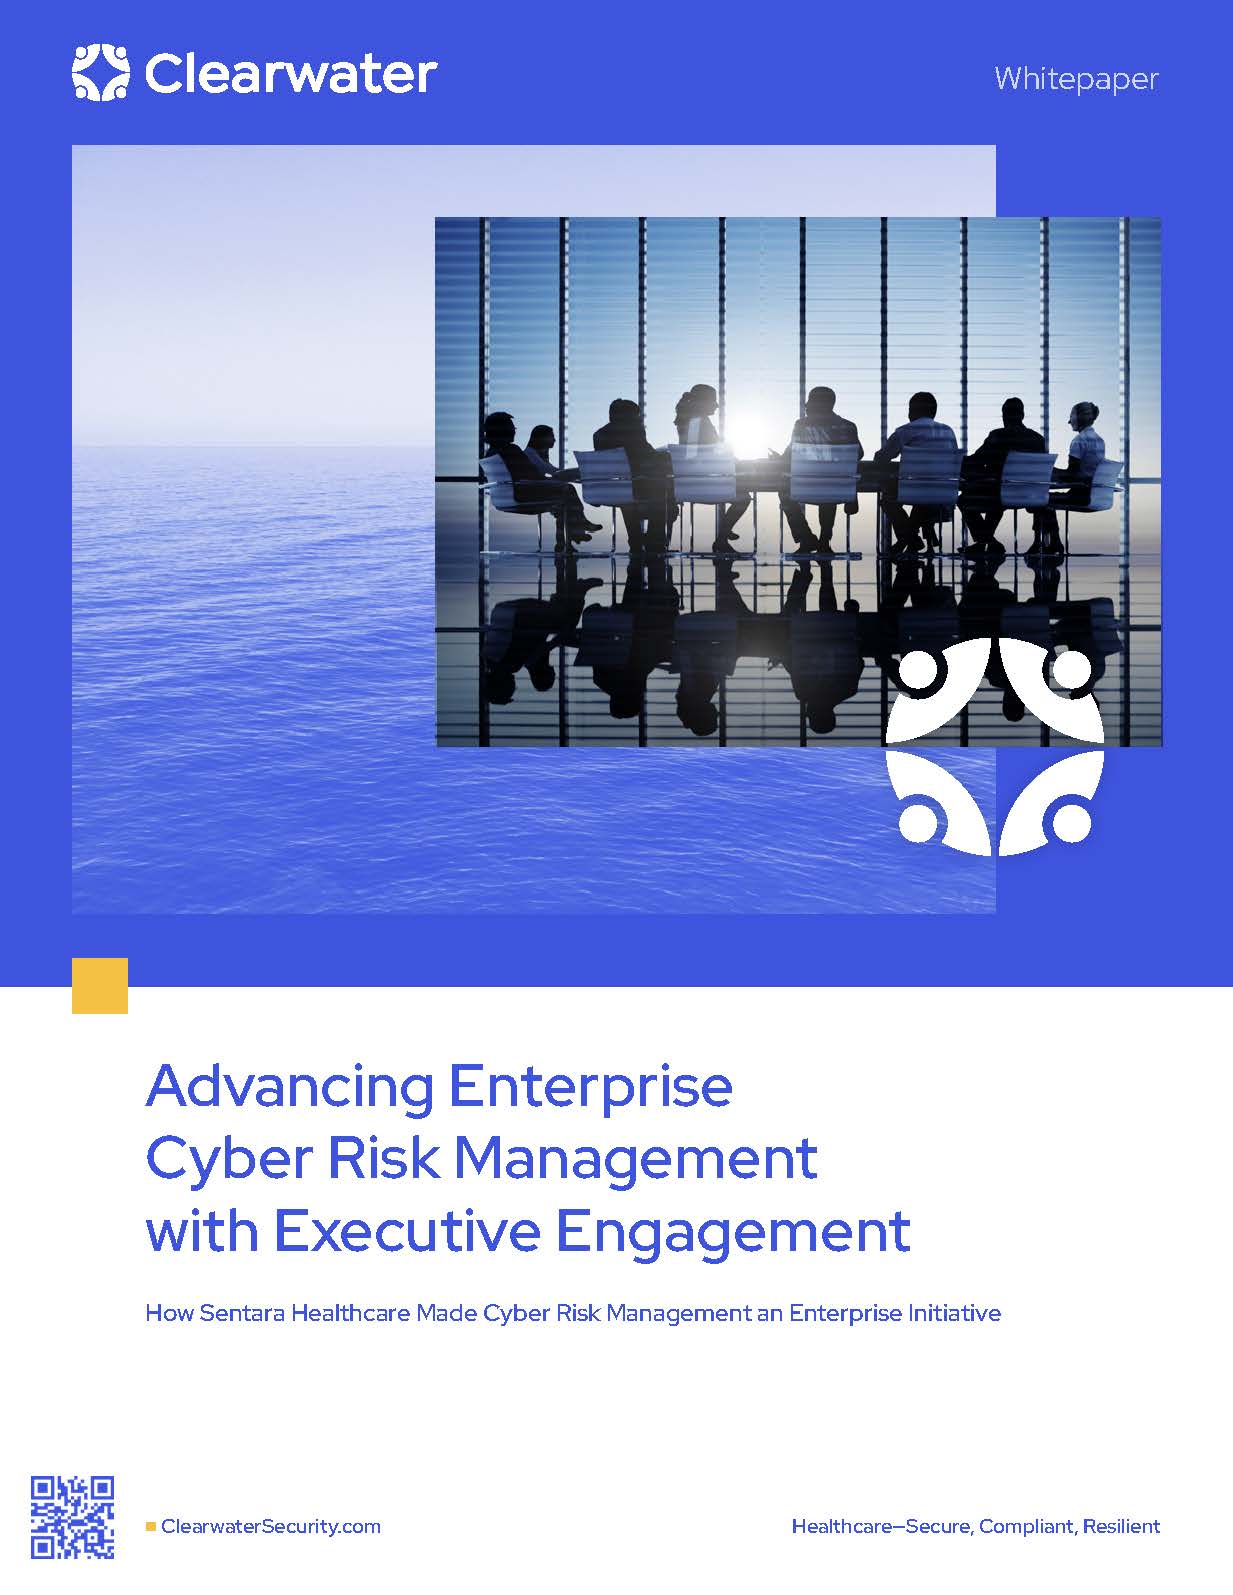 Advancing Enterprise Cyber Risk Management with Executive Engagement by Clearwater